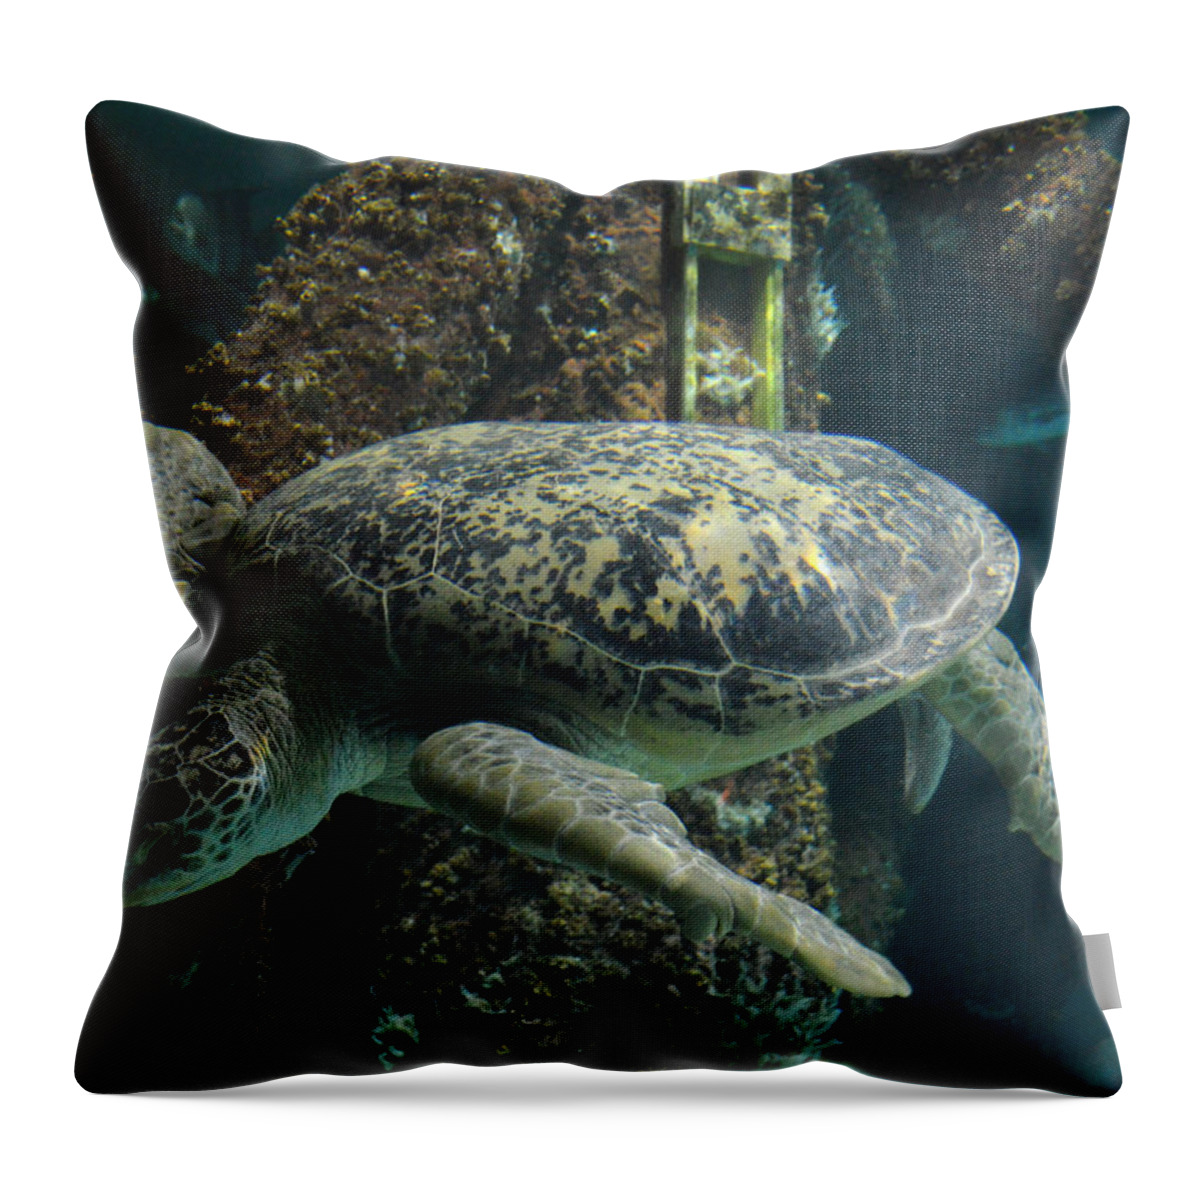 Turtle Throw Pillow featuring the photograph Sea Turtle by Maggy Marsh